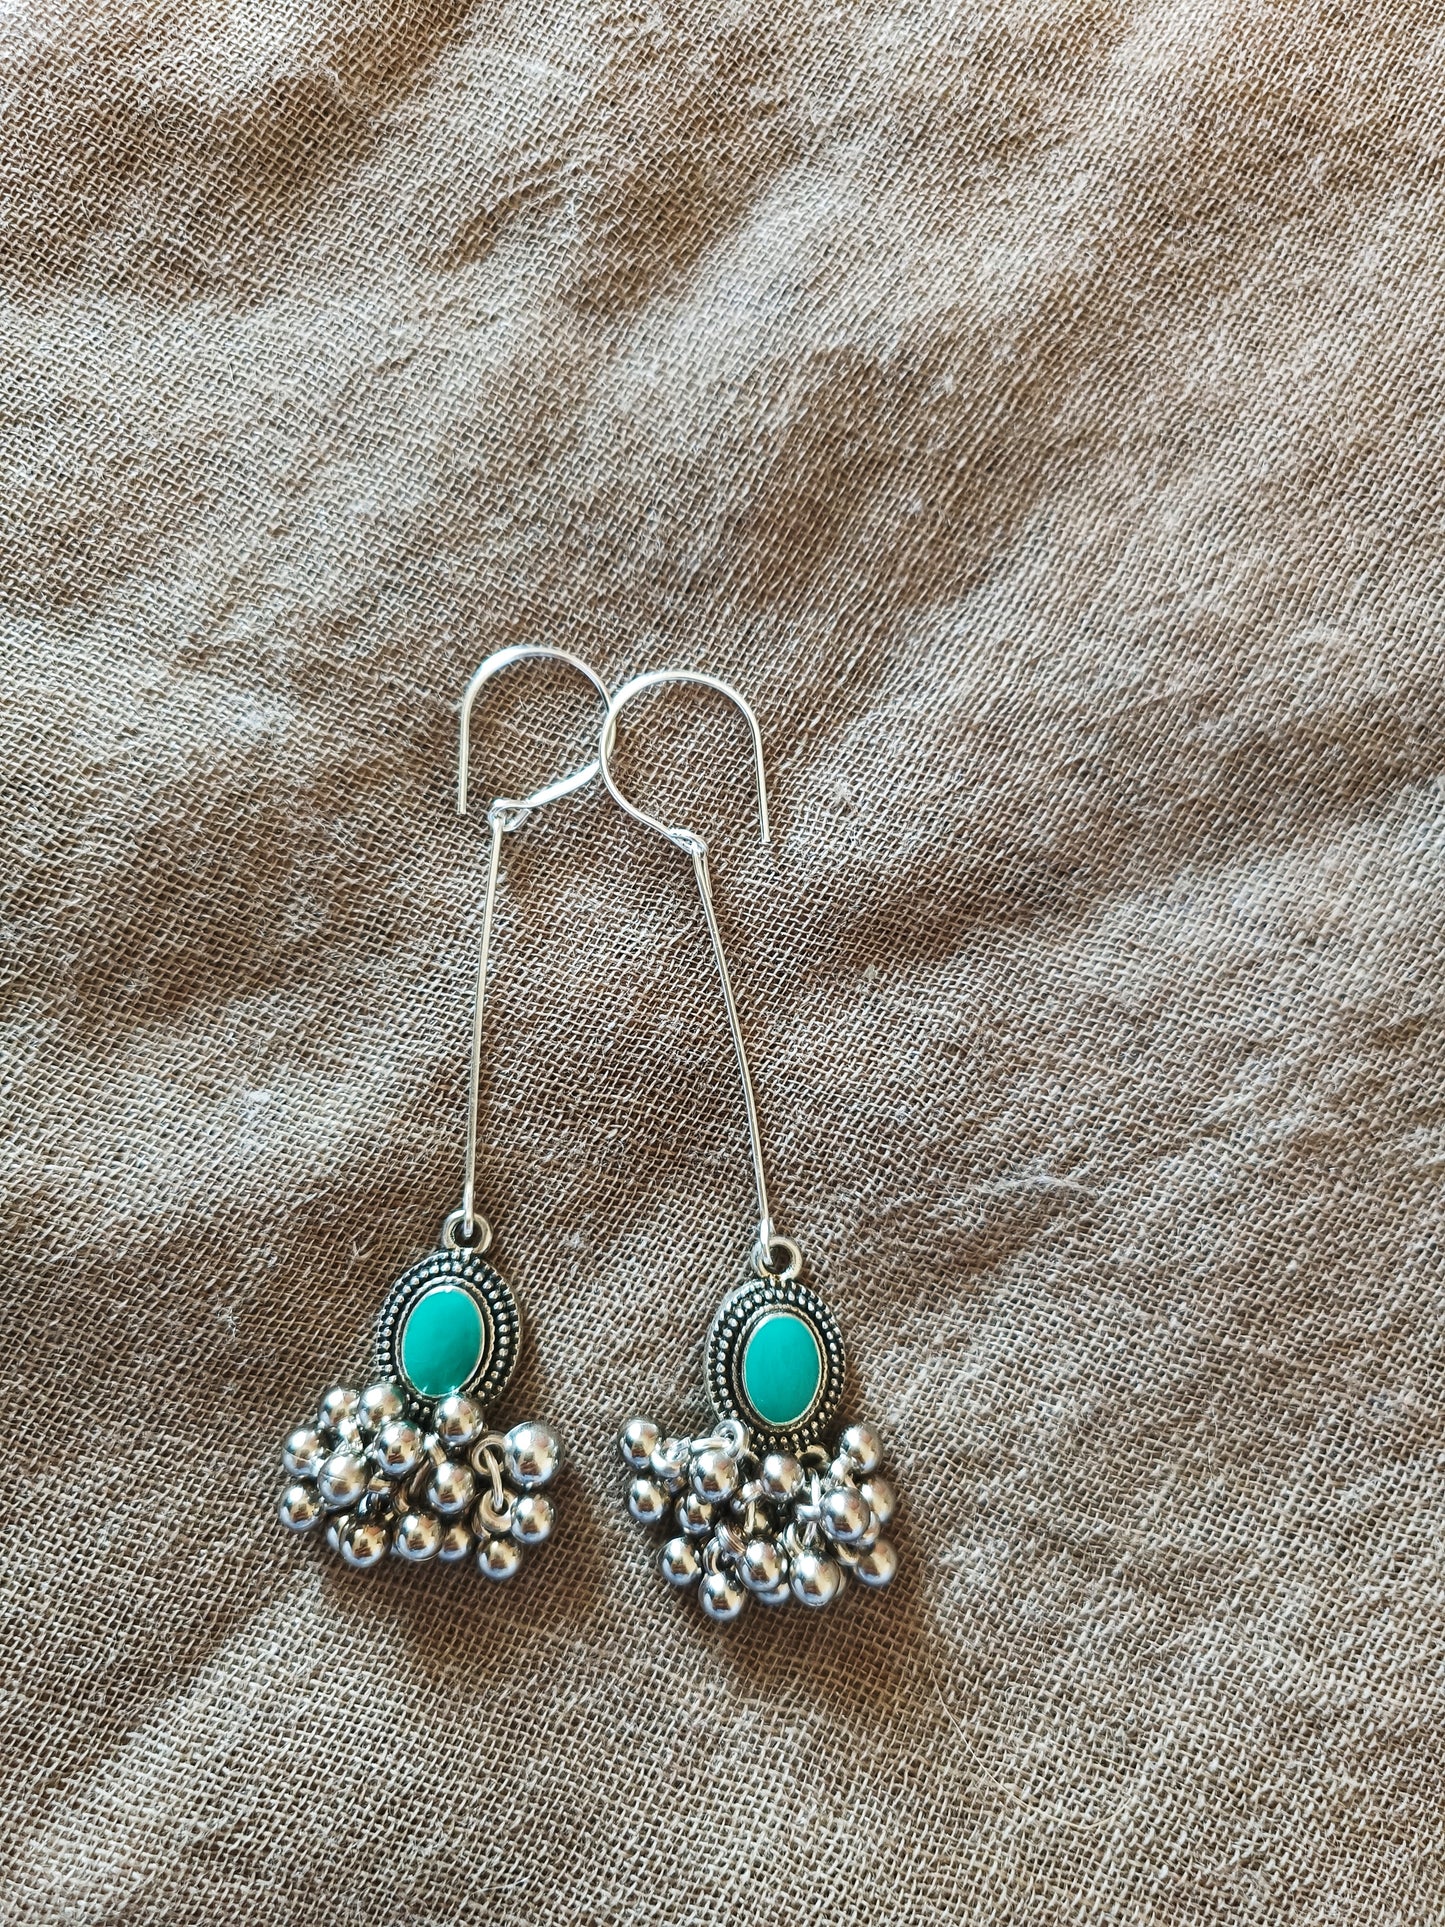 Small Hanging Earrings March